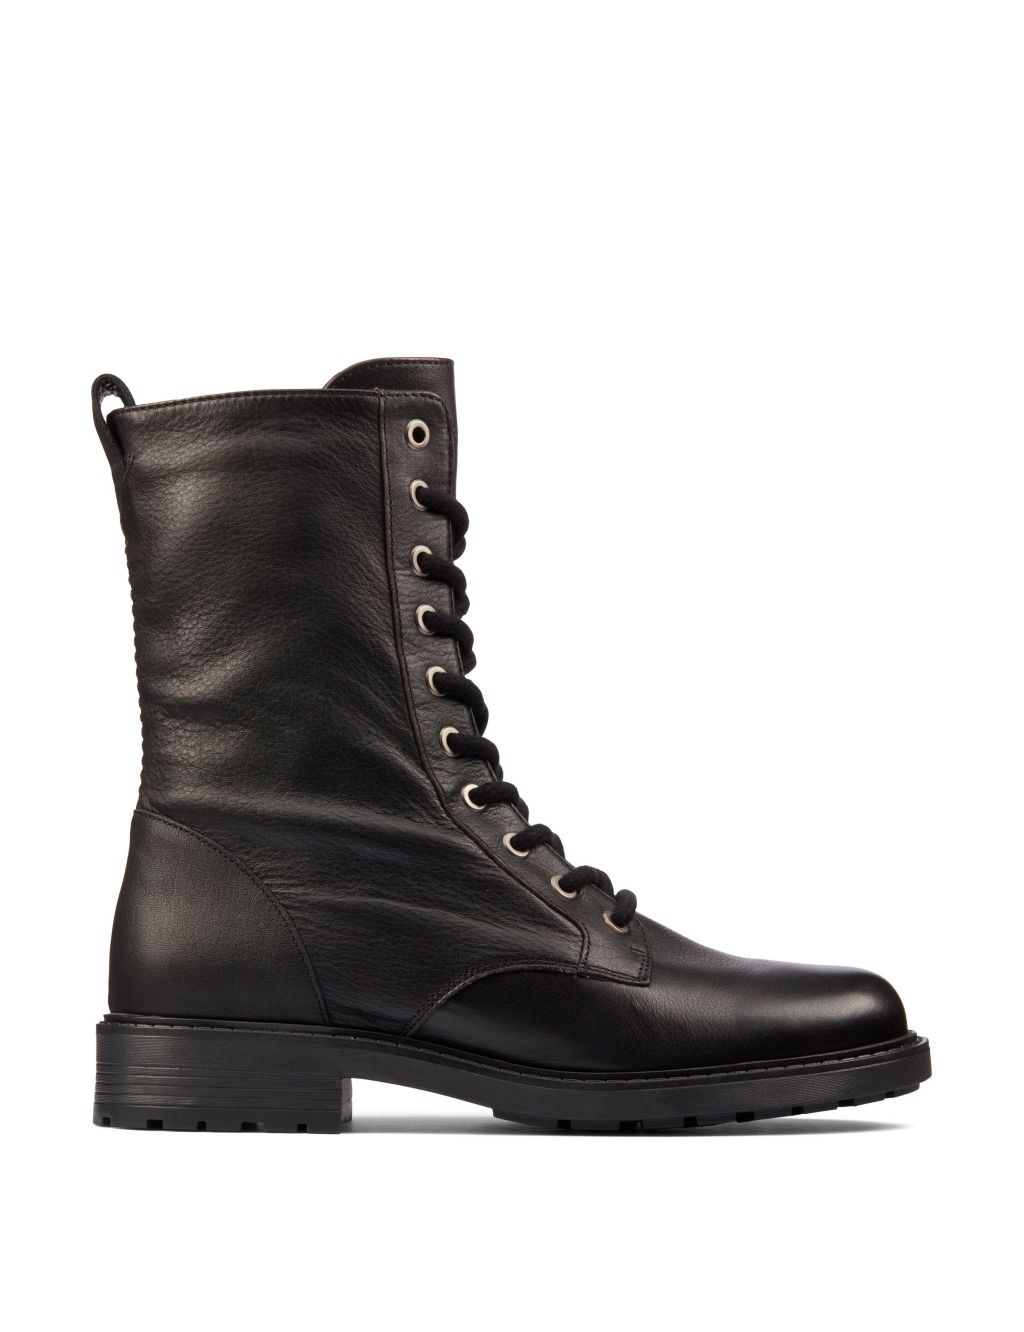 Women's Wide Fit Boots | M&S